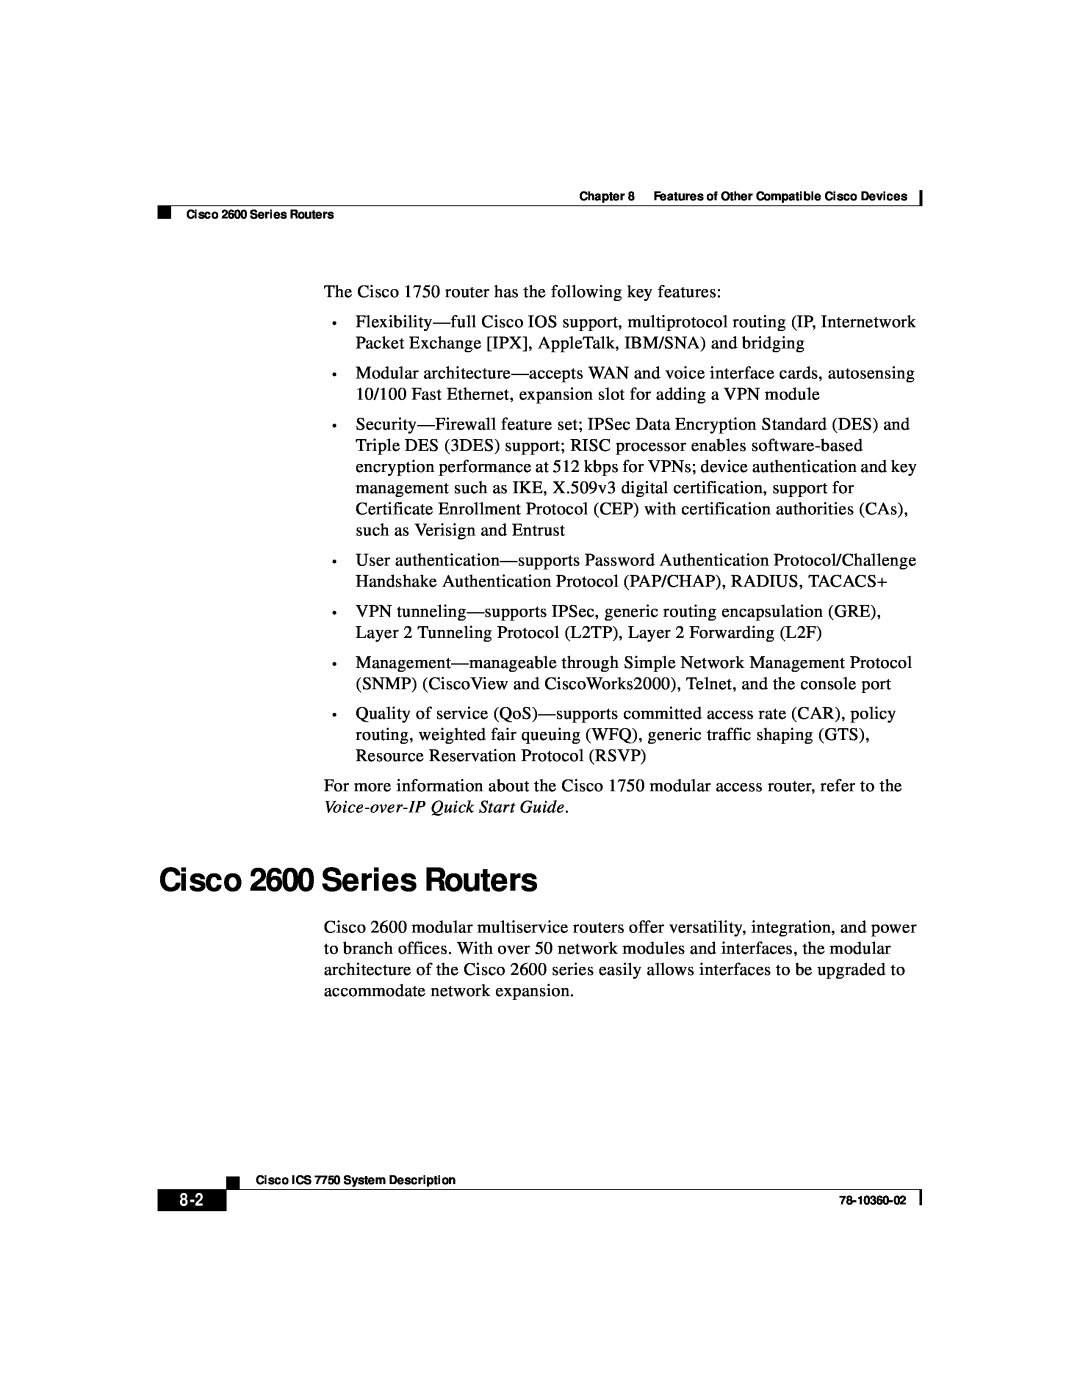 Cisco Systems ICS-7750 manual Cisco 2600 Series Routers 